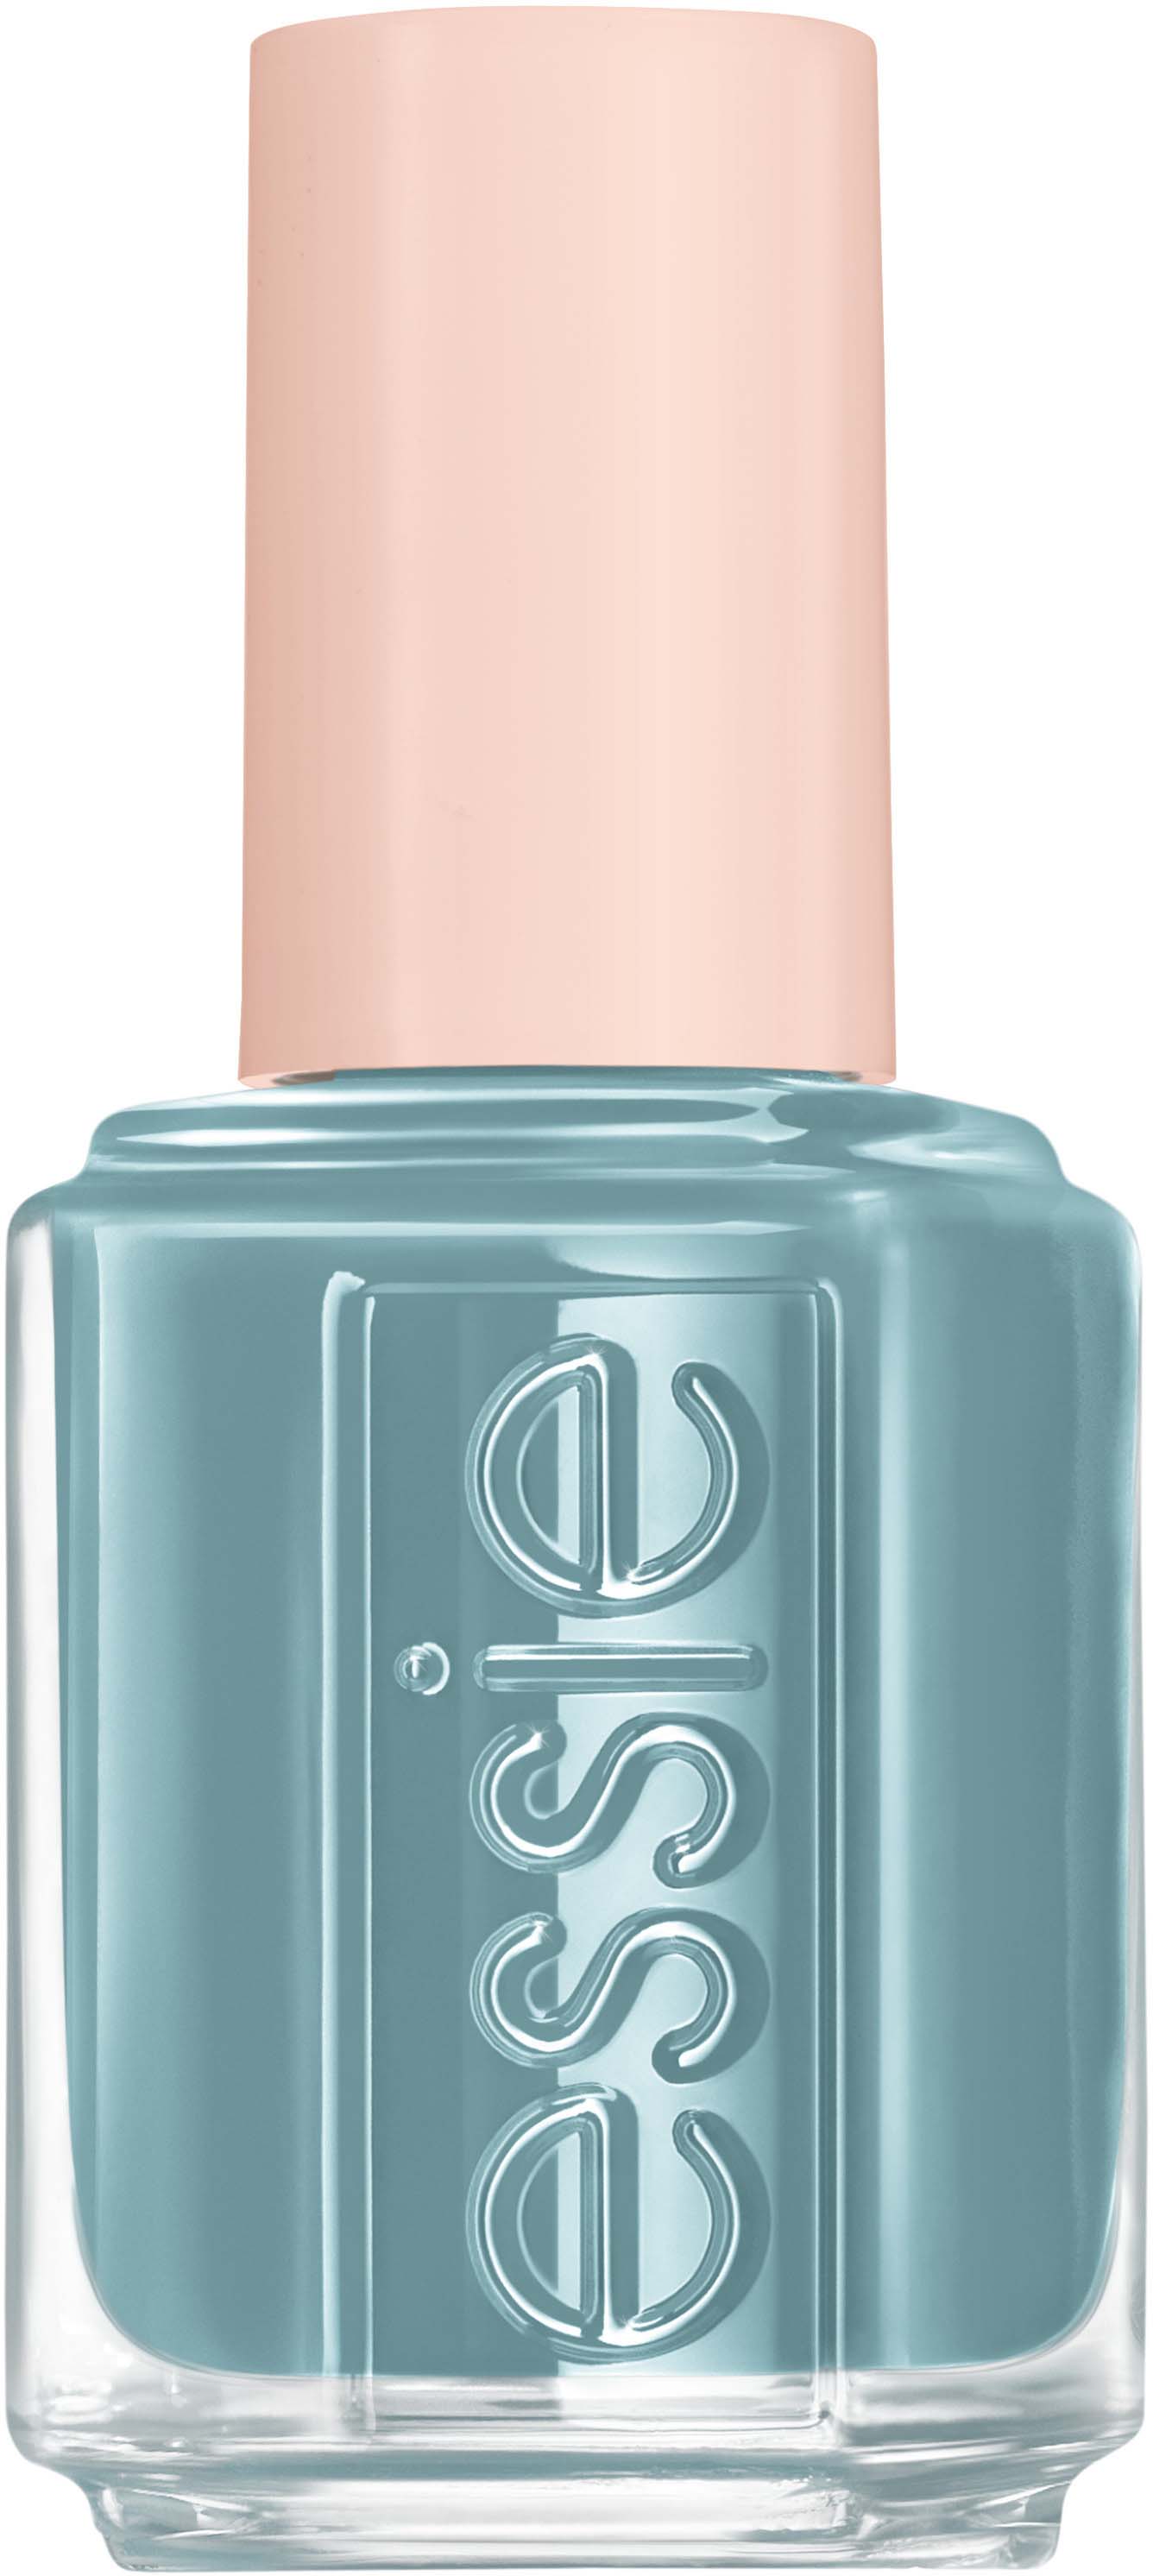 Essie LOVE Essie Plant-based Nail Impressions 210 80% Color Good by